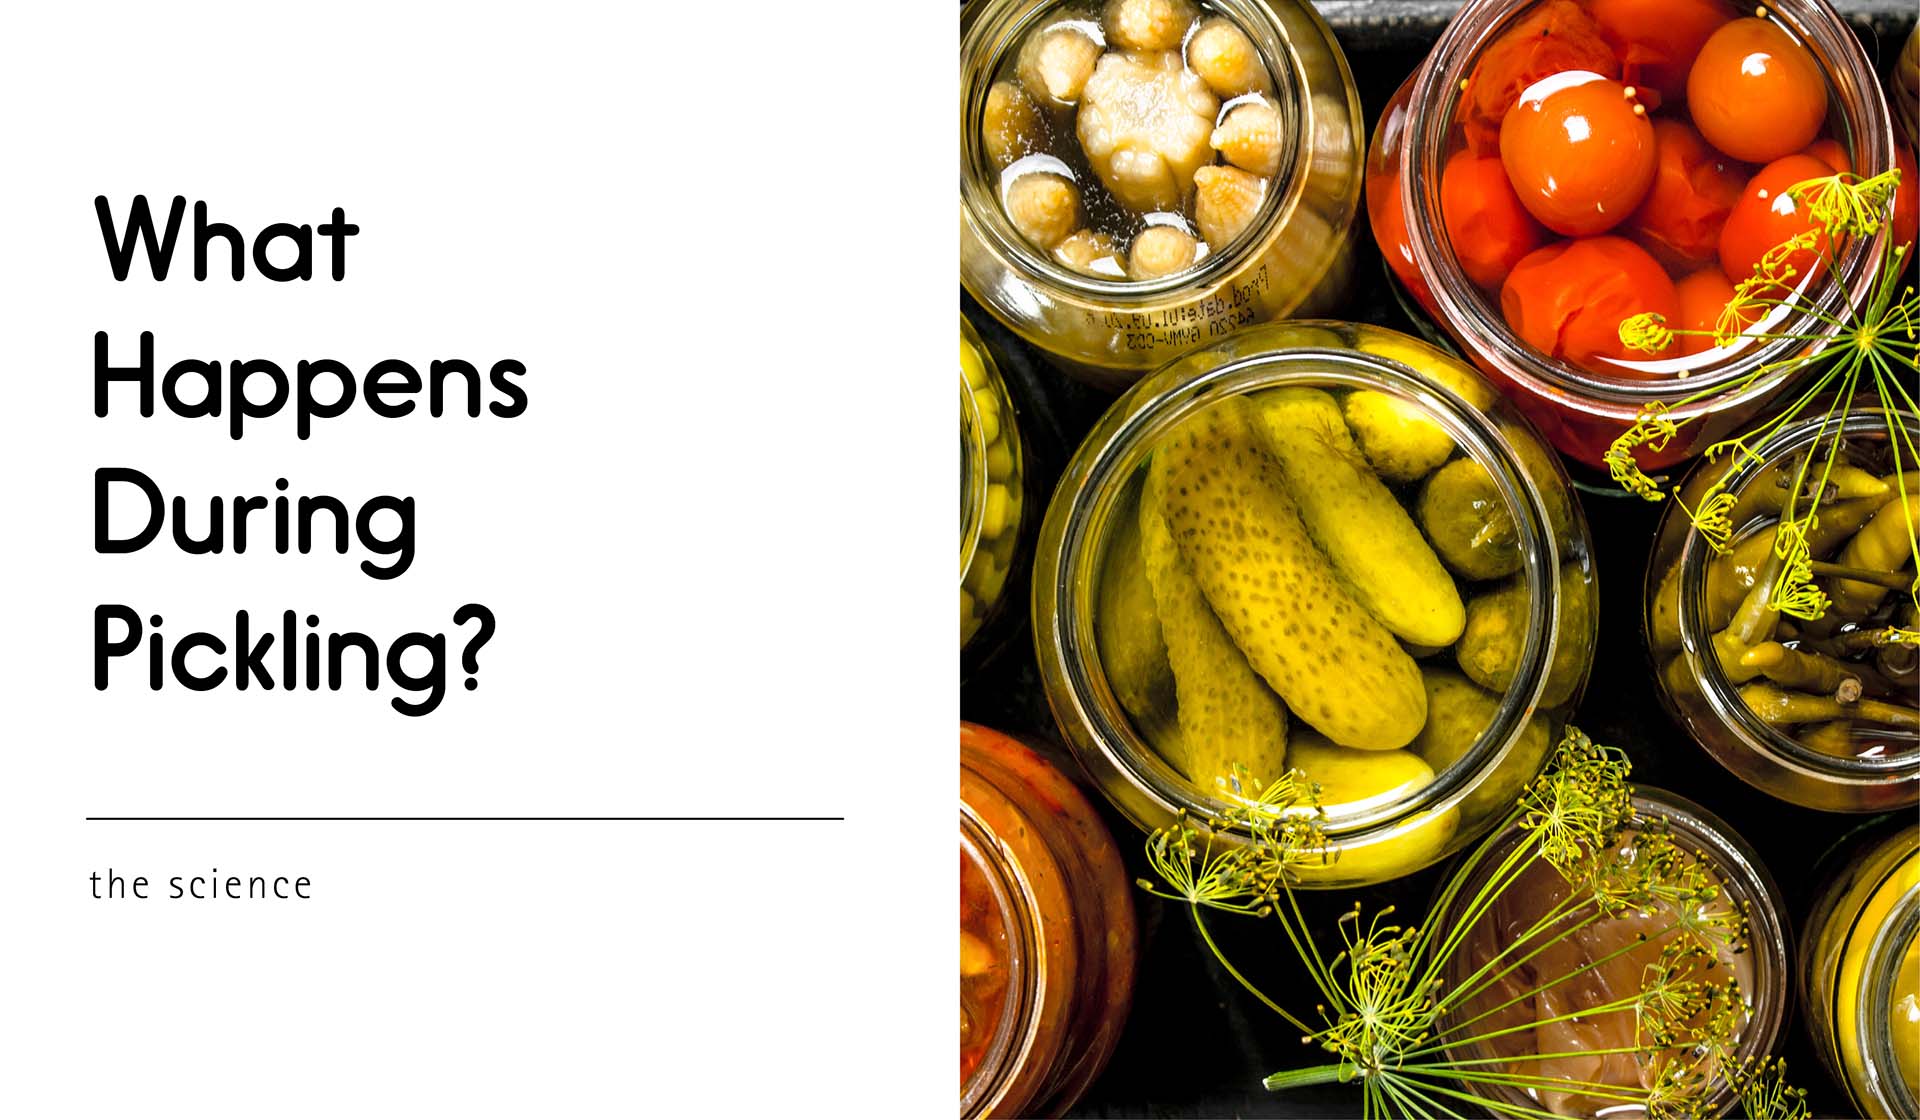 What Happens During Pickling?